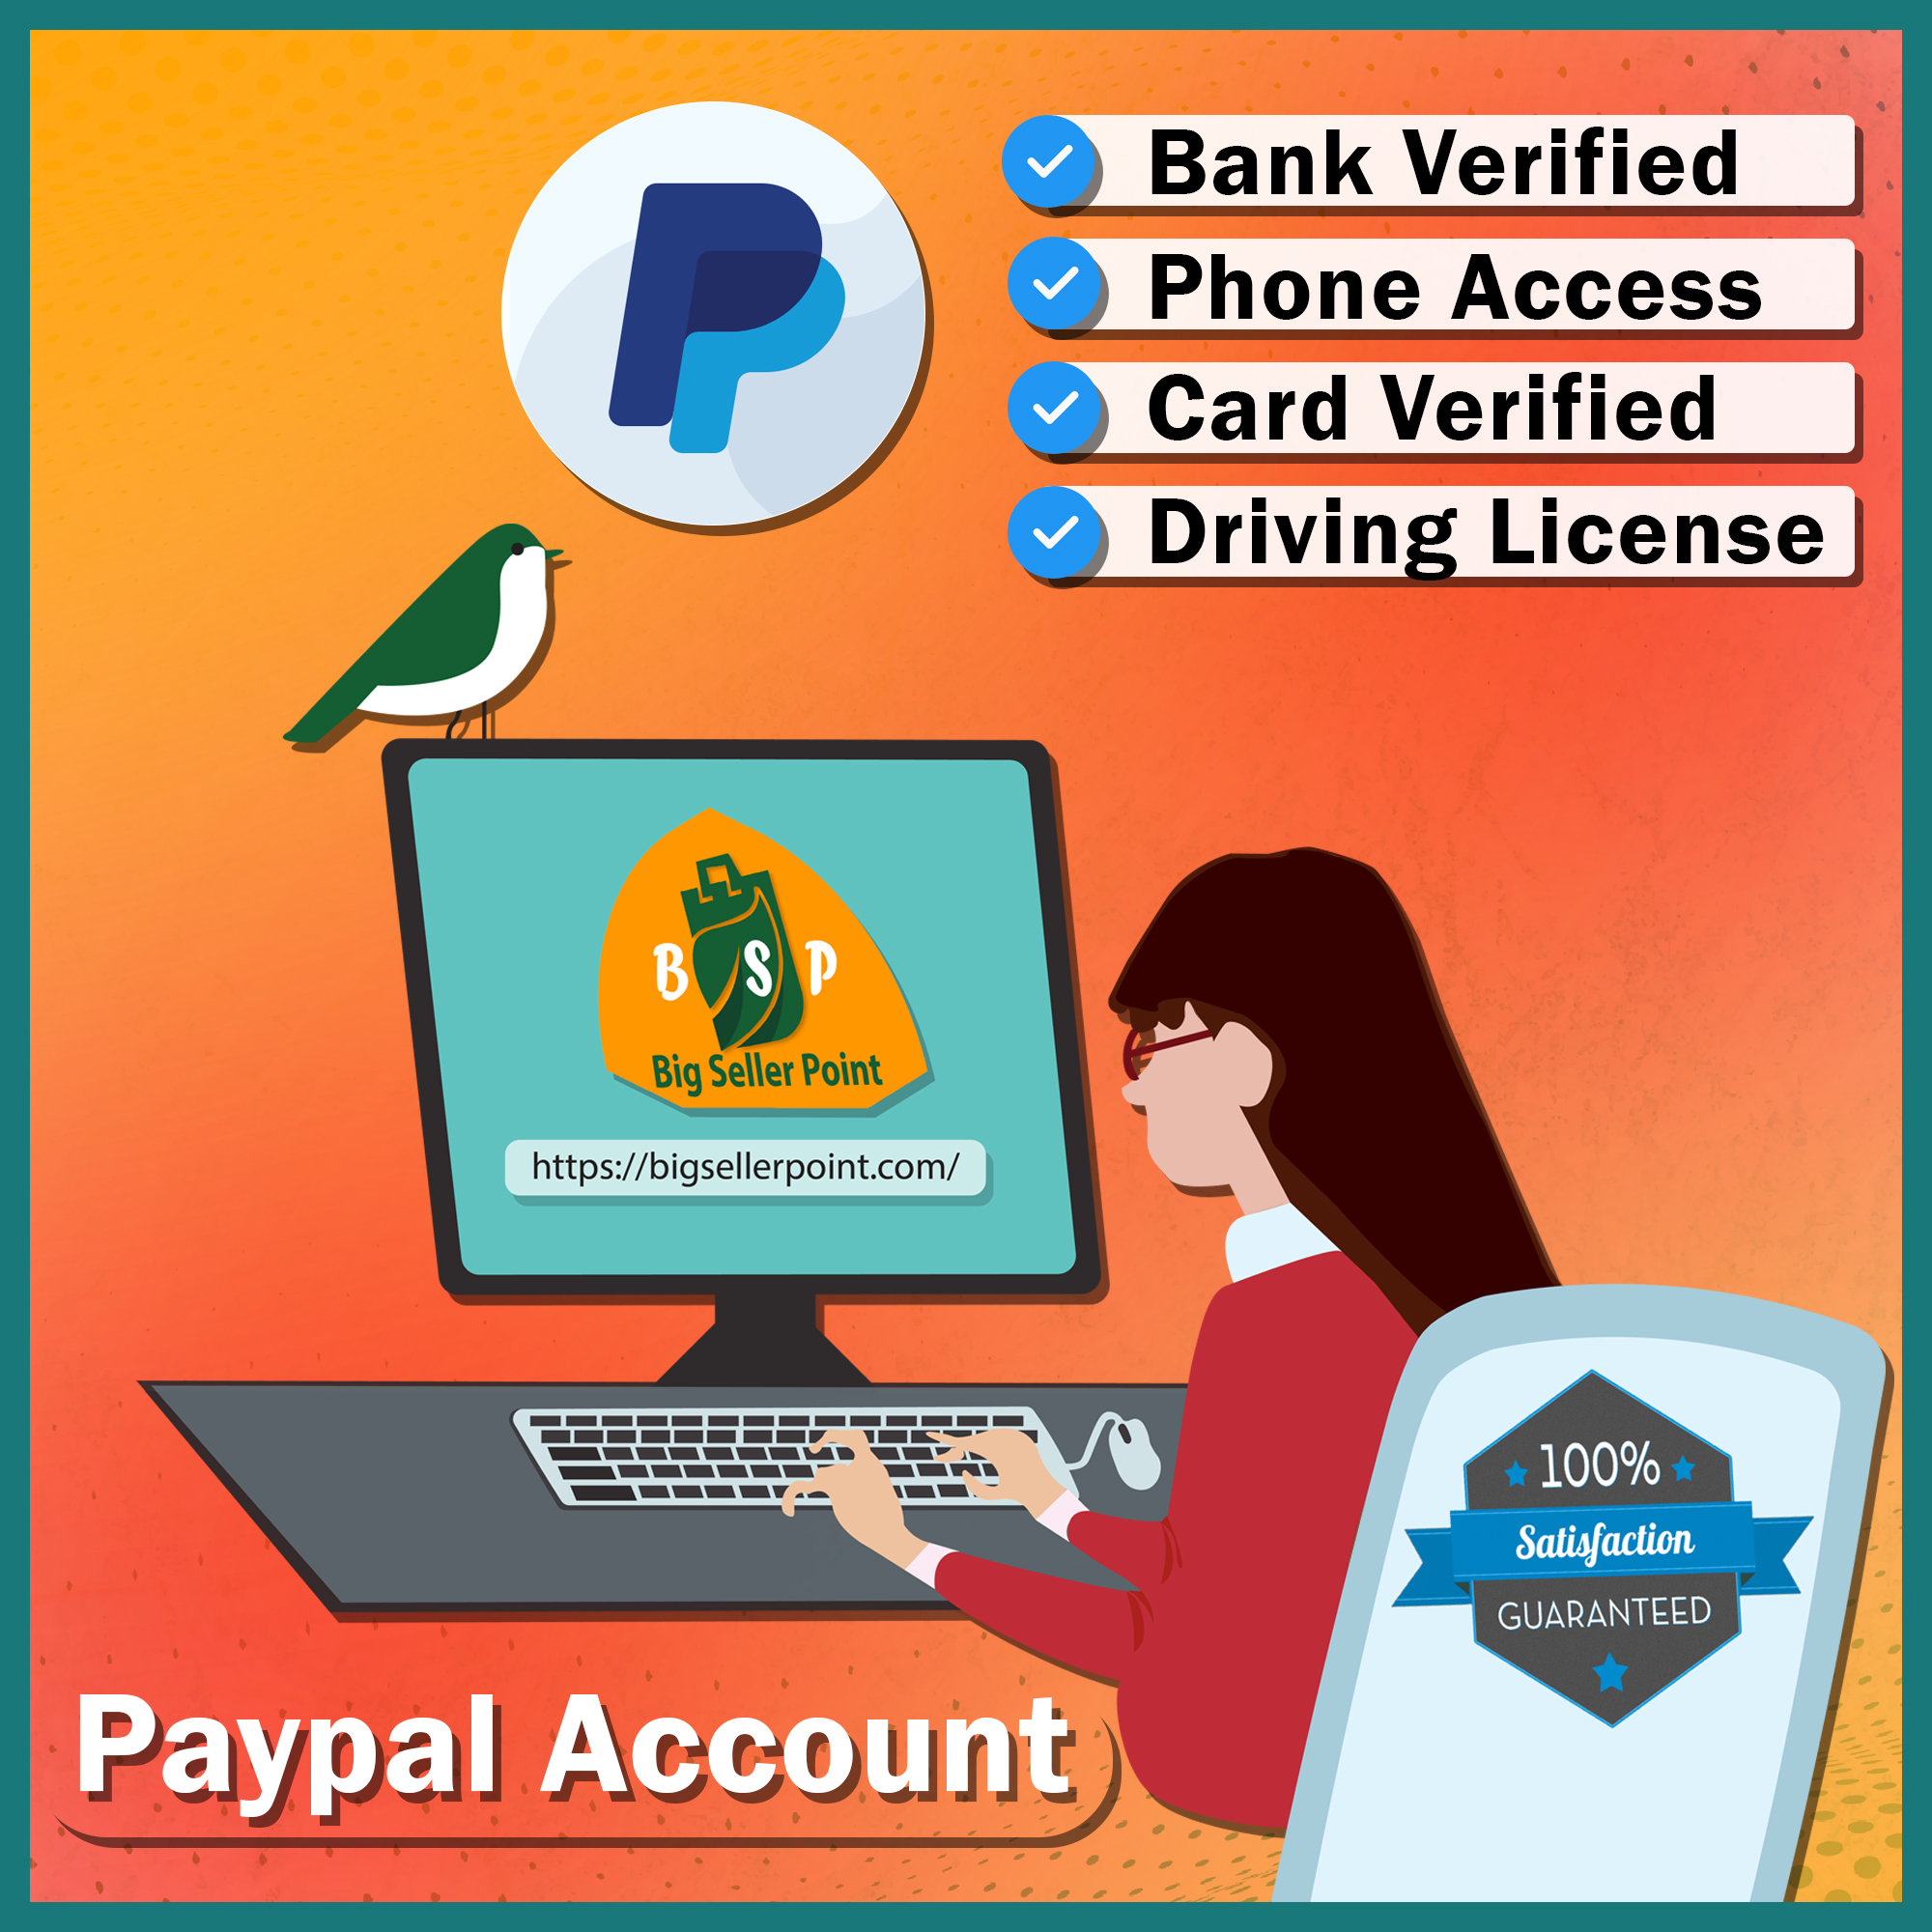 Buy Verified PayPal Account - Bigsellerpoint